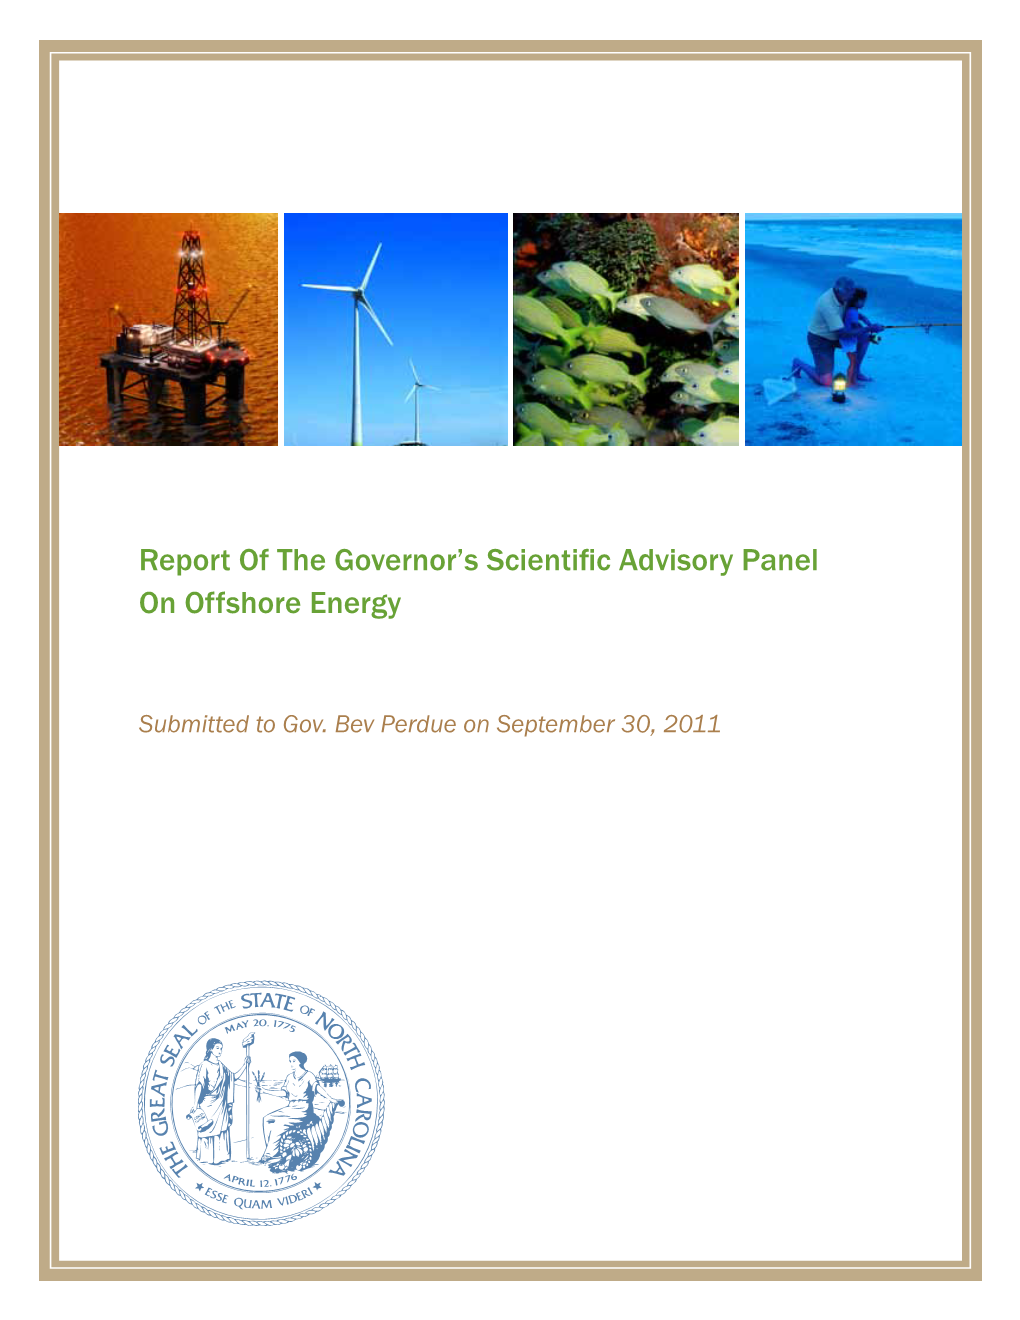 Report of the Governor's Scientific Advisory Panel on Offshore Energy